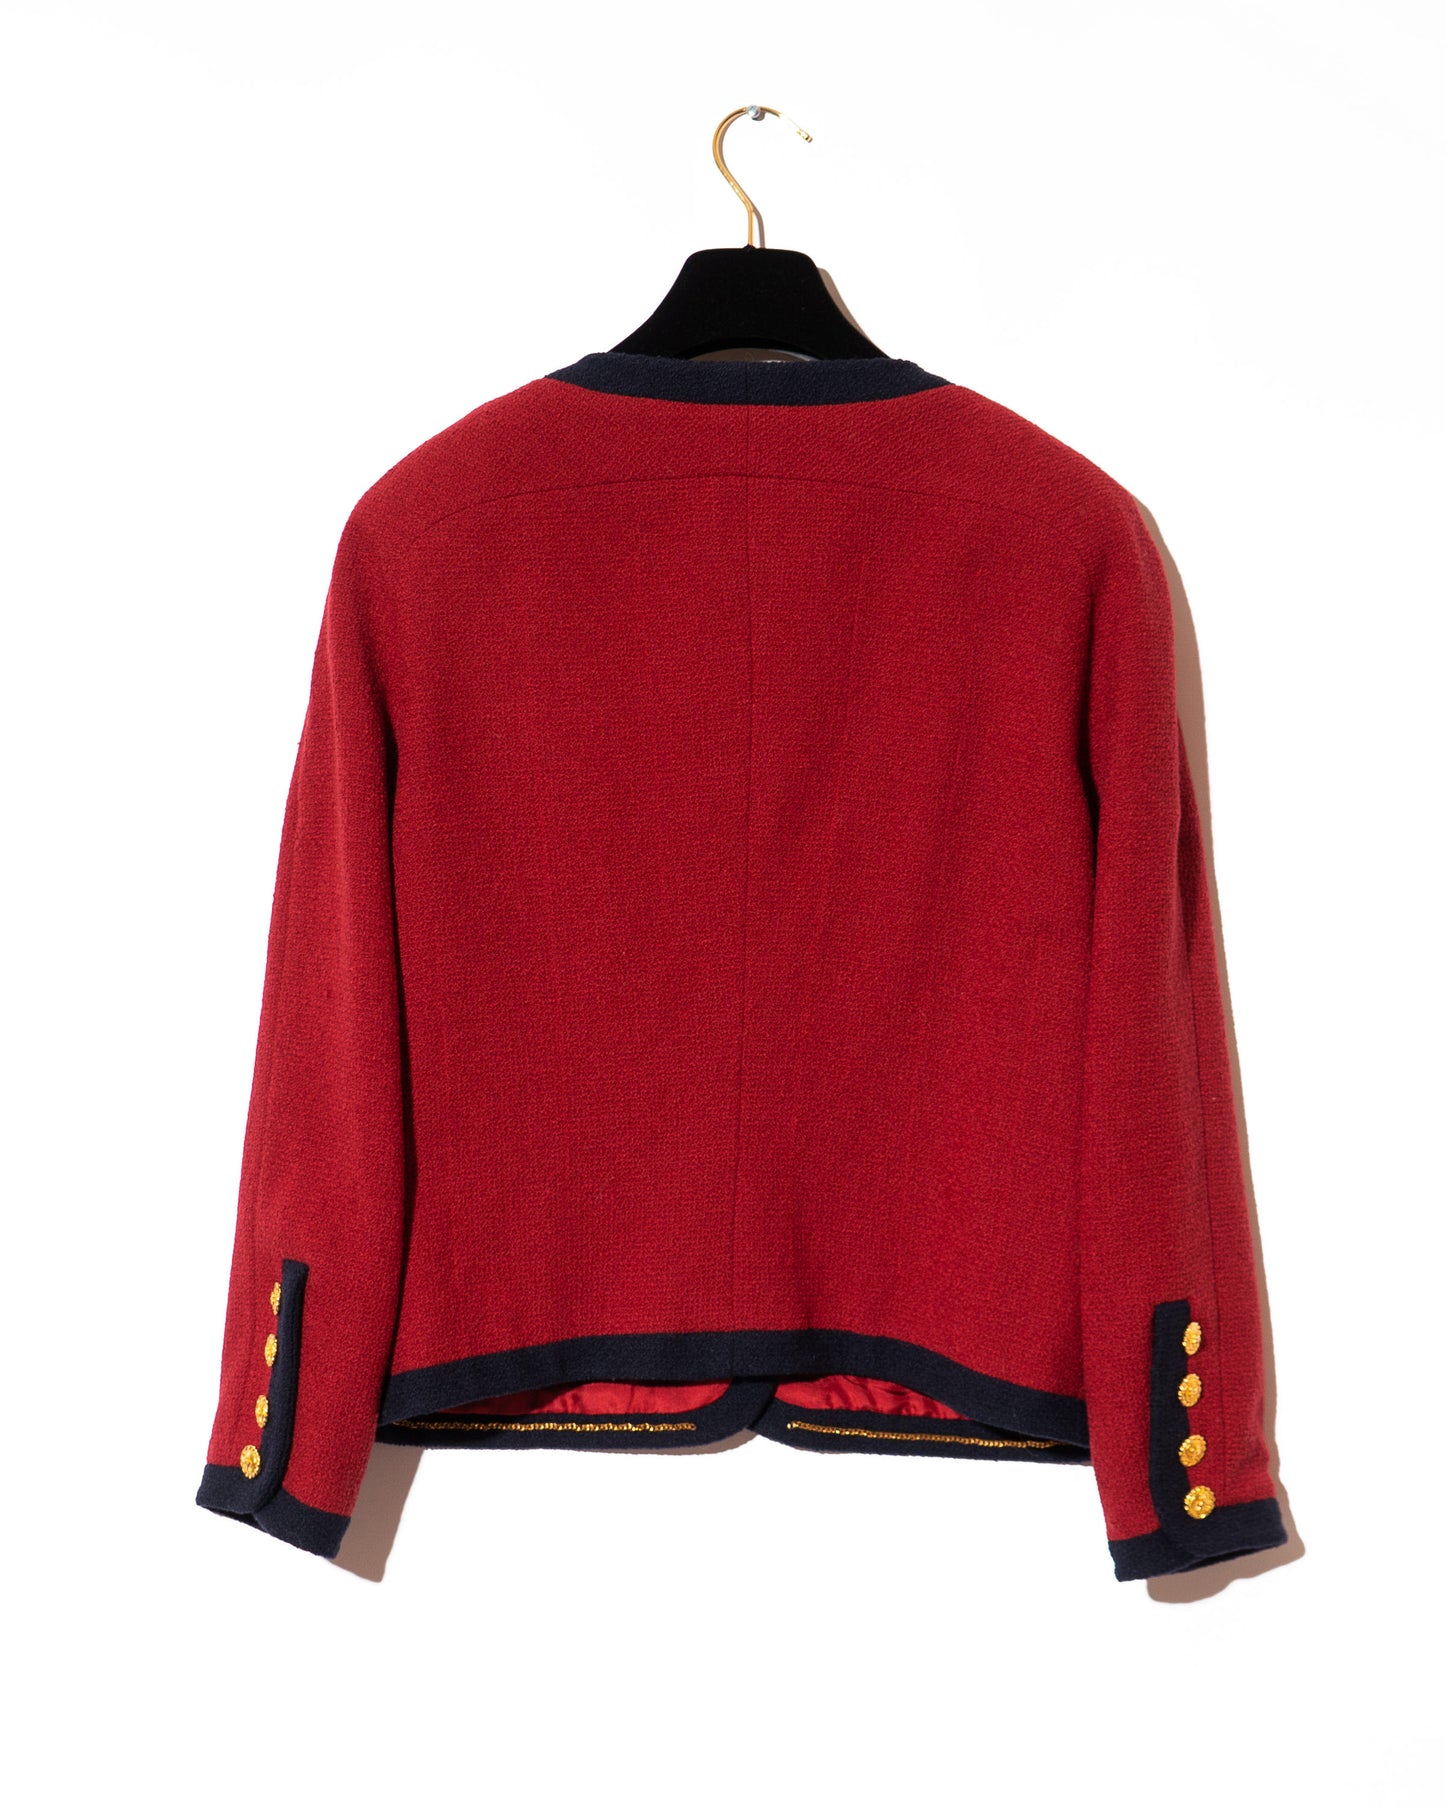 FR42-46 Chanel Spring 1989 Timeless  Two Pocket Collarless Cut Red and Navy Wool Tweed Jacket